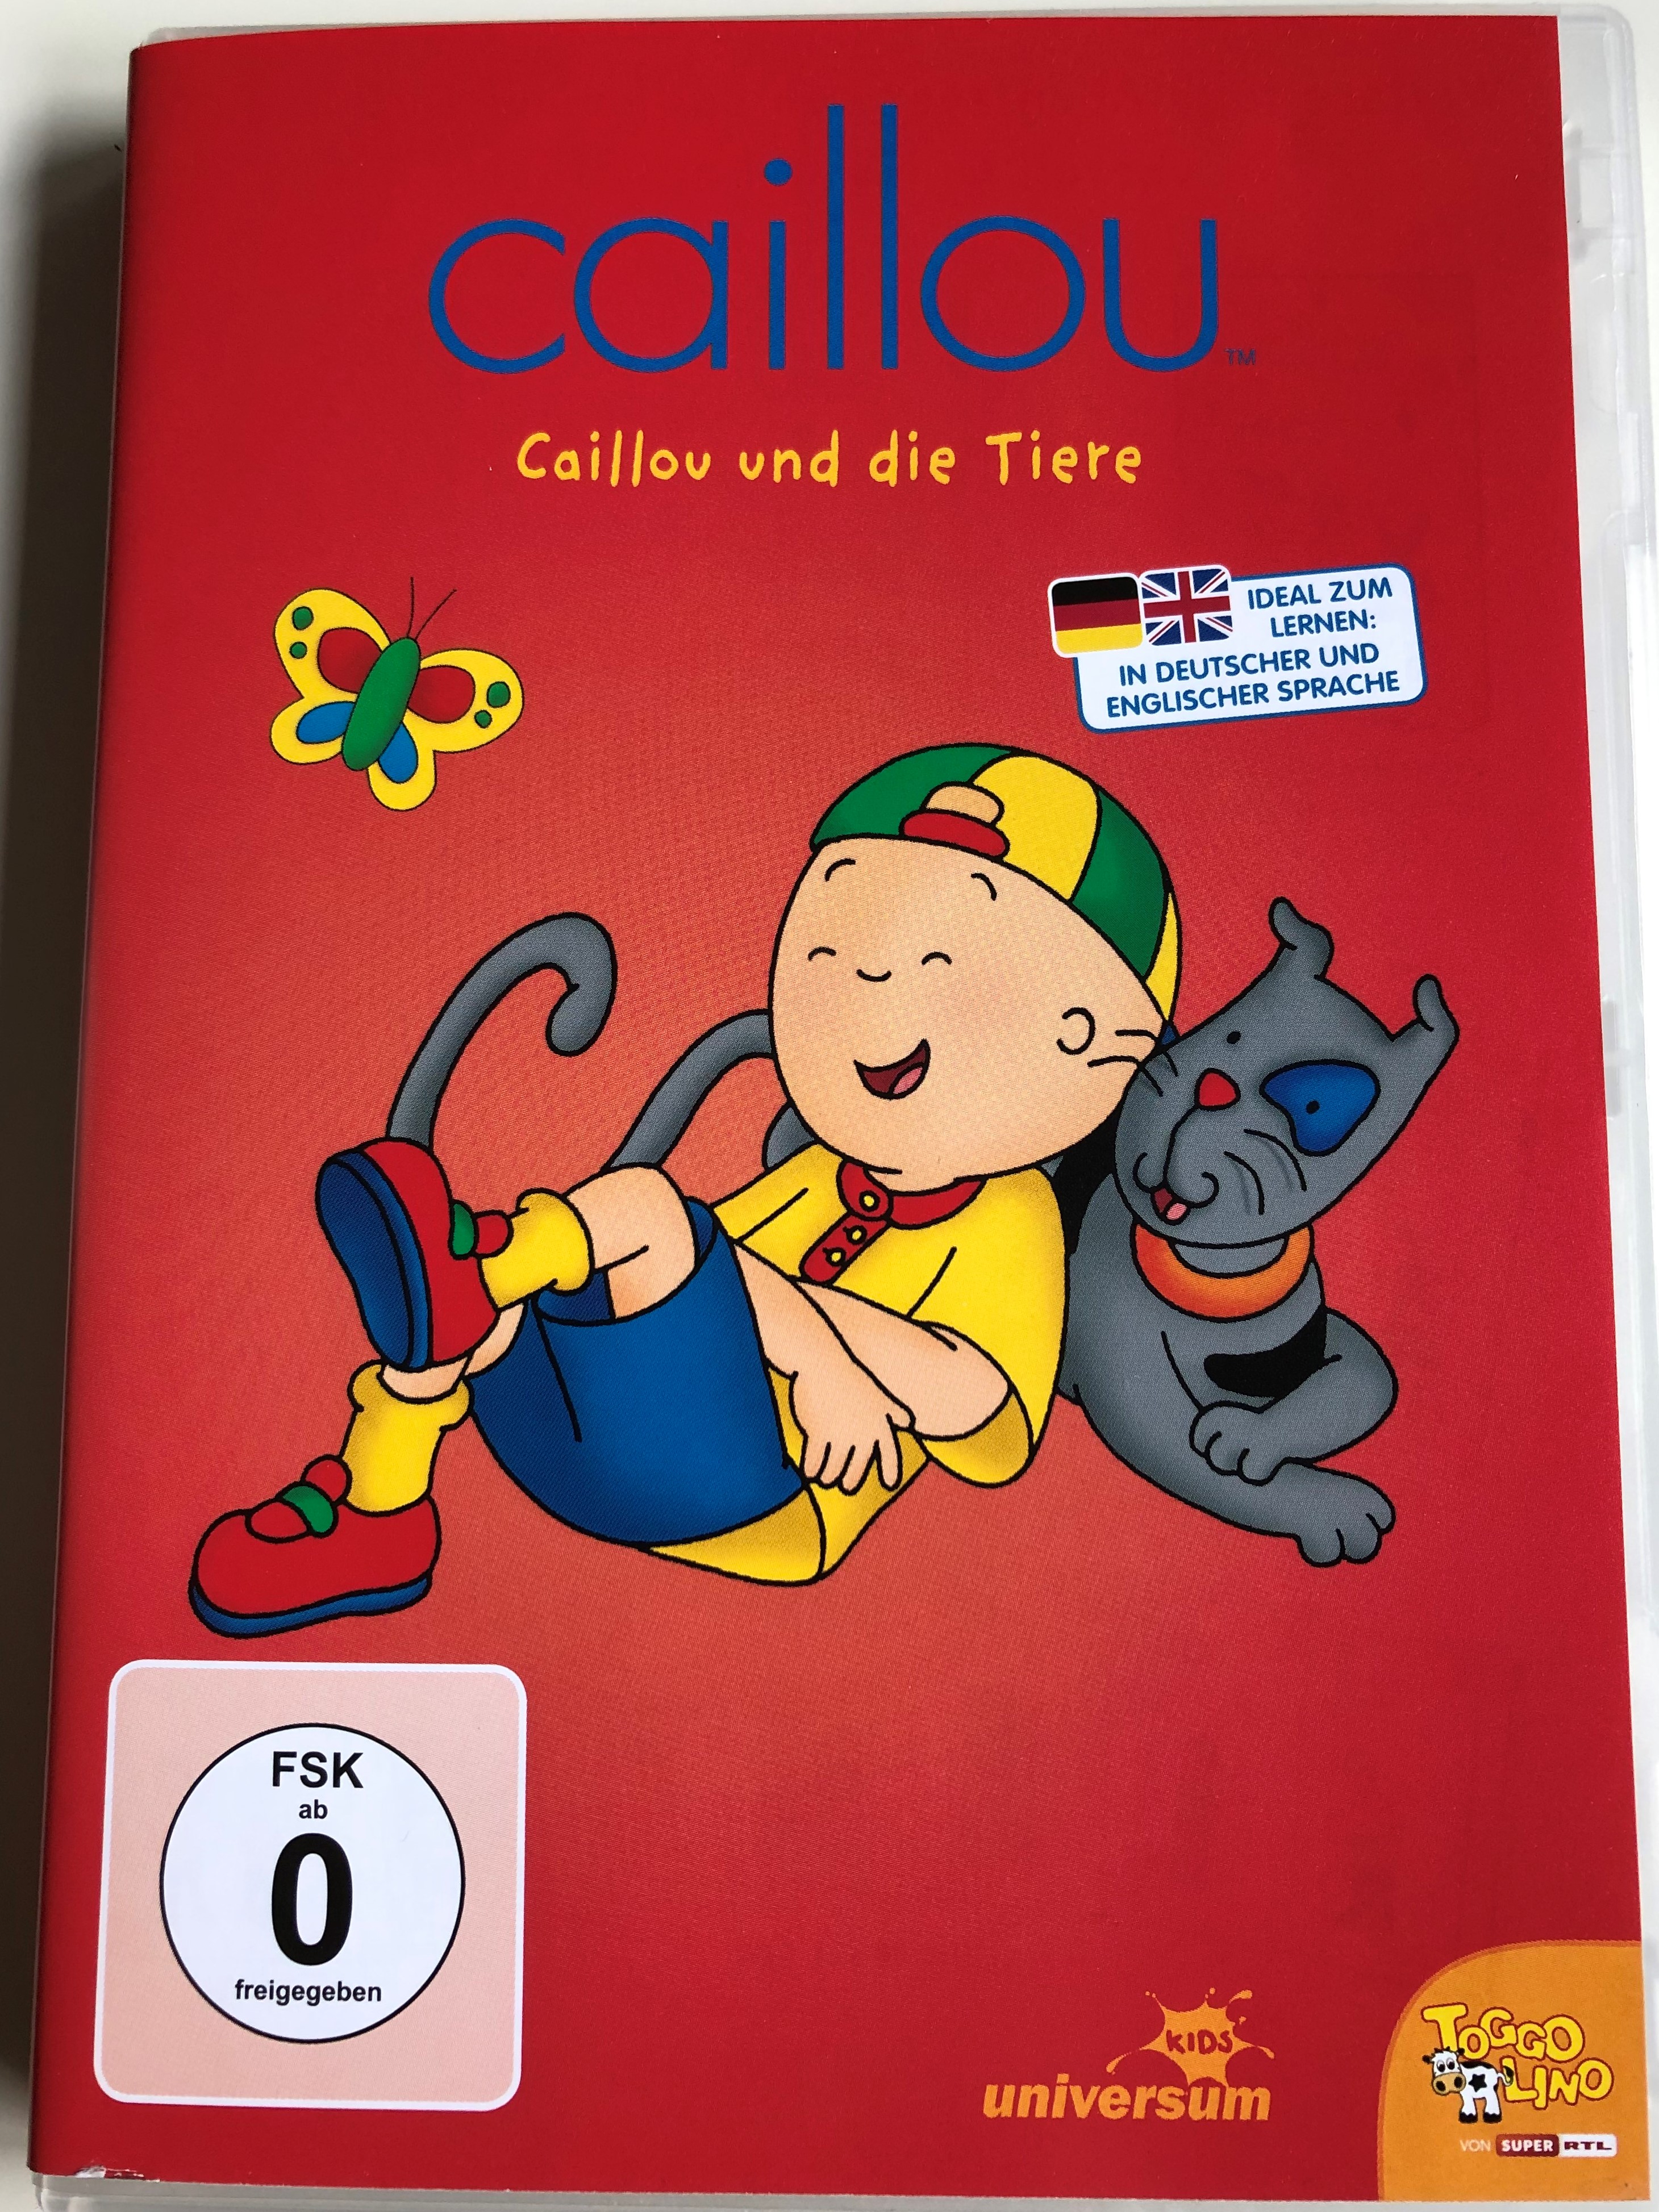 caillou-dvd-2000-caillou-und-die-tiere-directed-by-jean-pilotte-canadian-educational-children-s-television-series-1.jpg